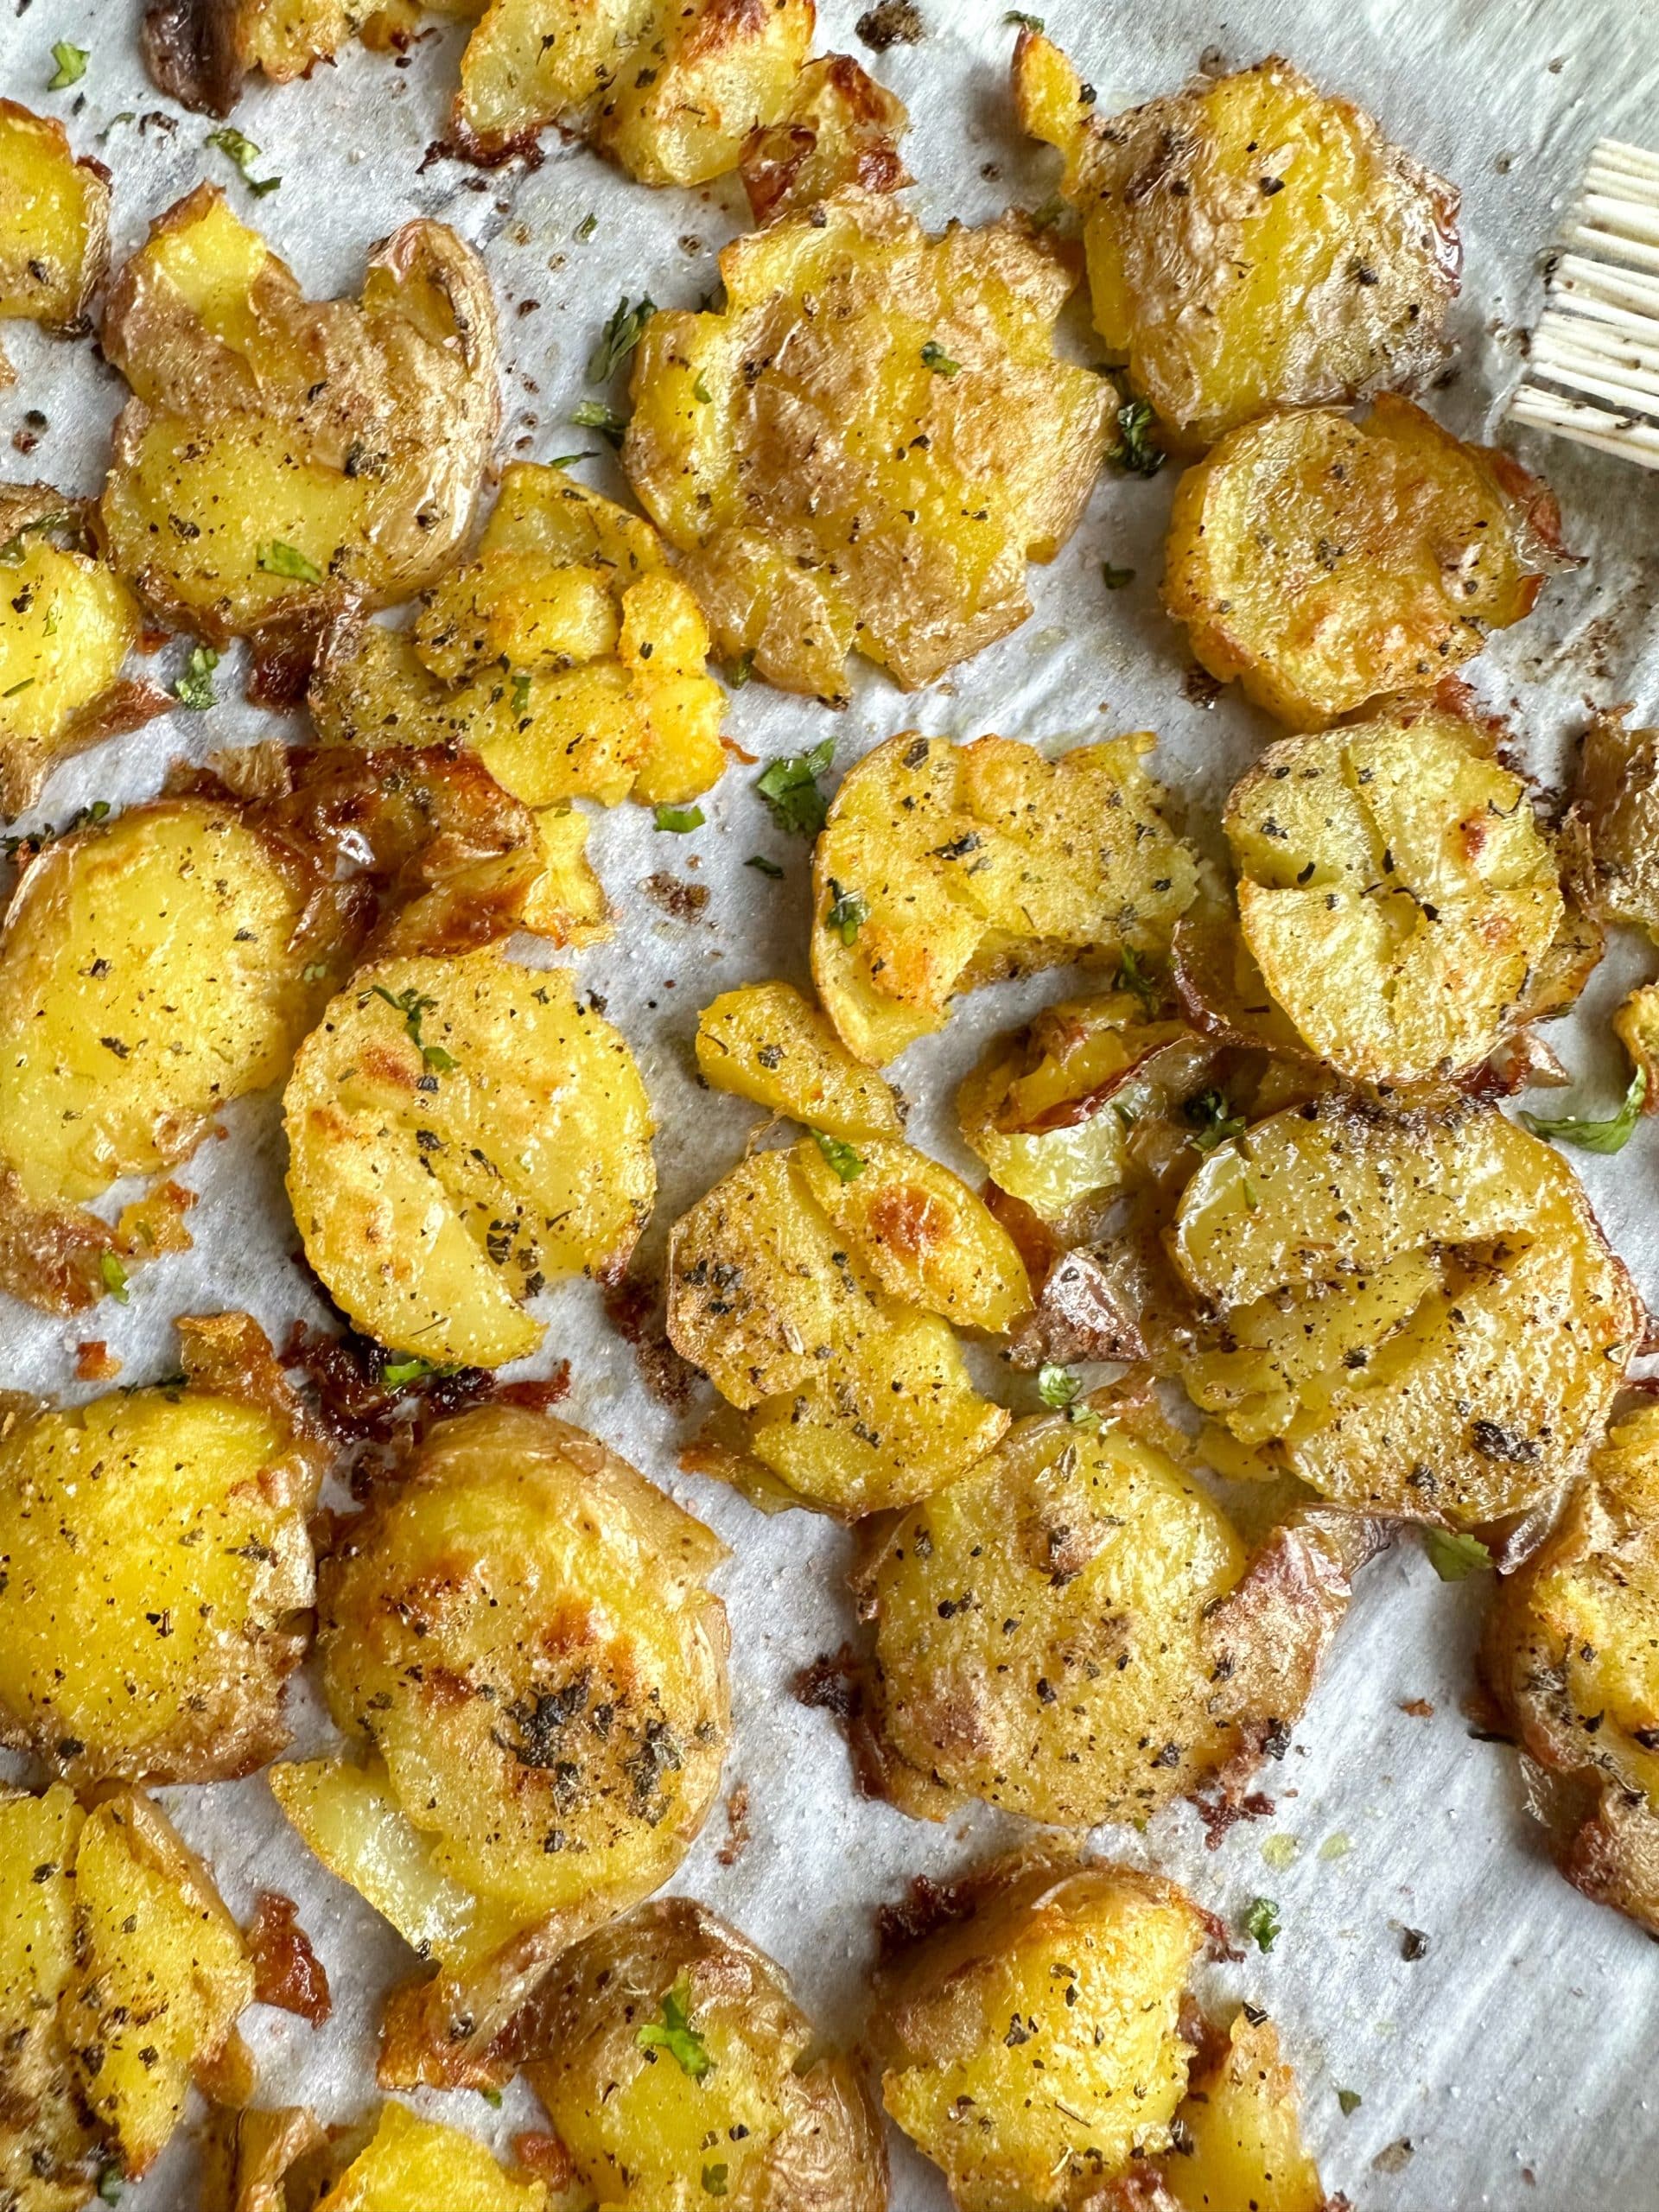 A tray of Crispy Garlic Smashed Potatoes on parchment paper.